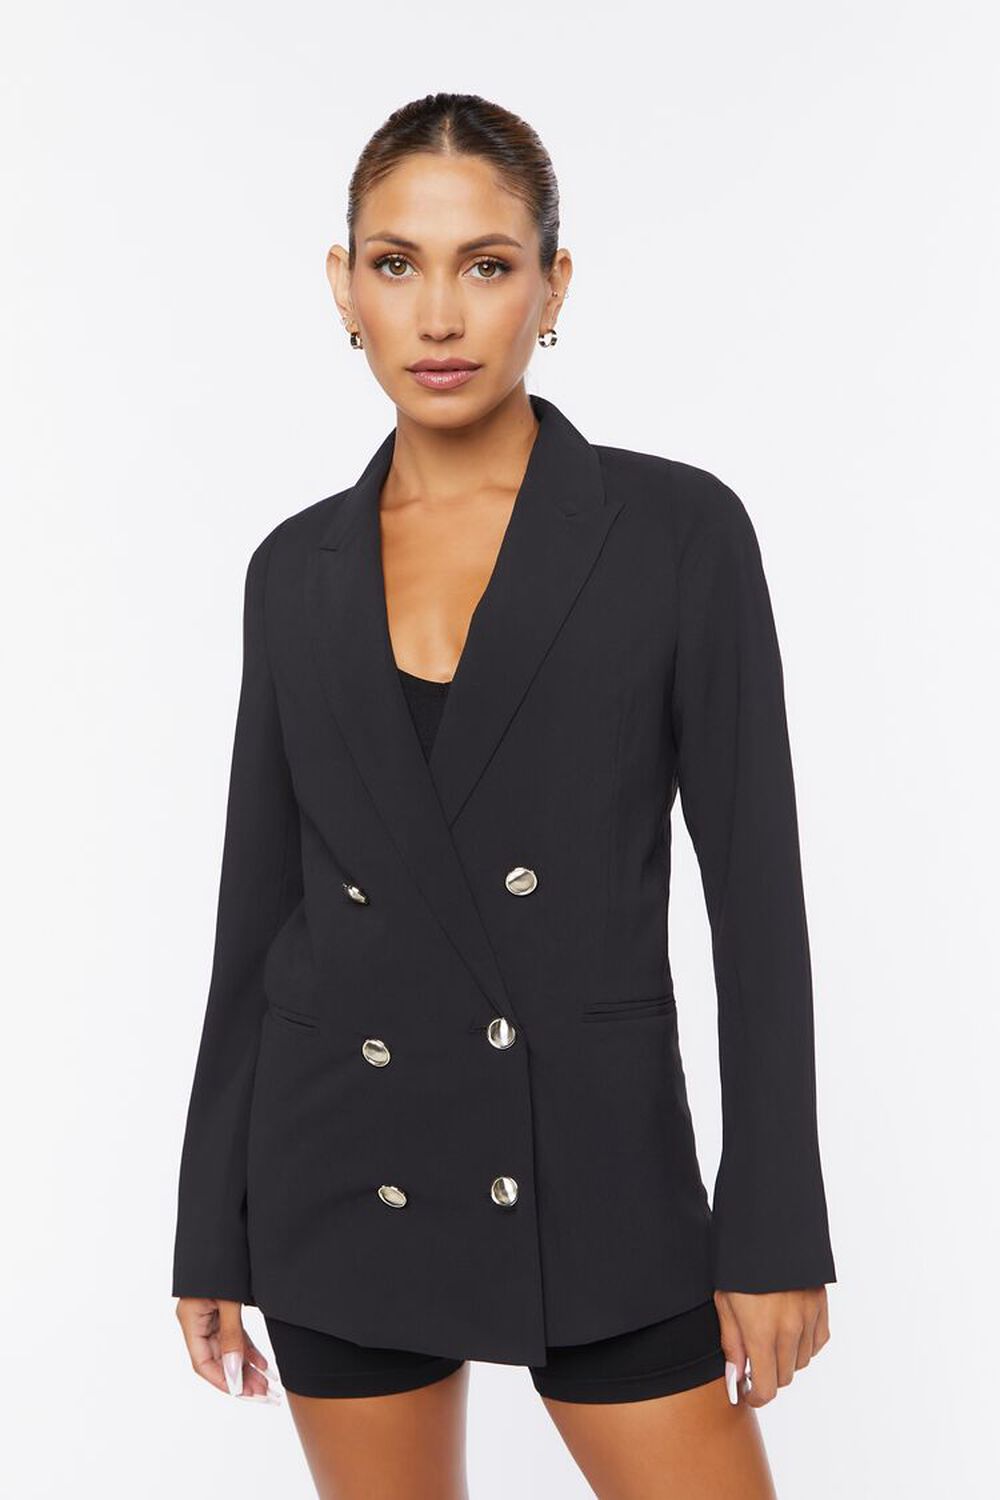 BLACK Notched Double-Breasted Blazer, image 1